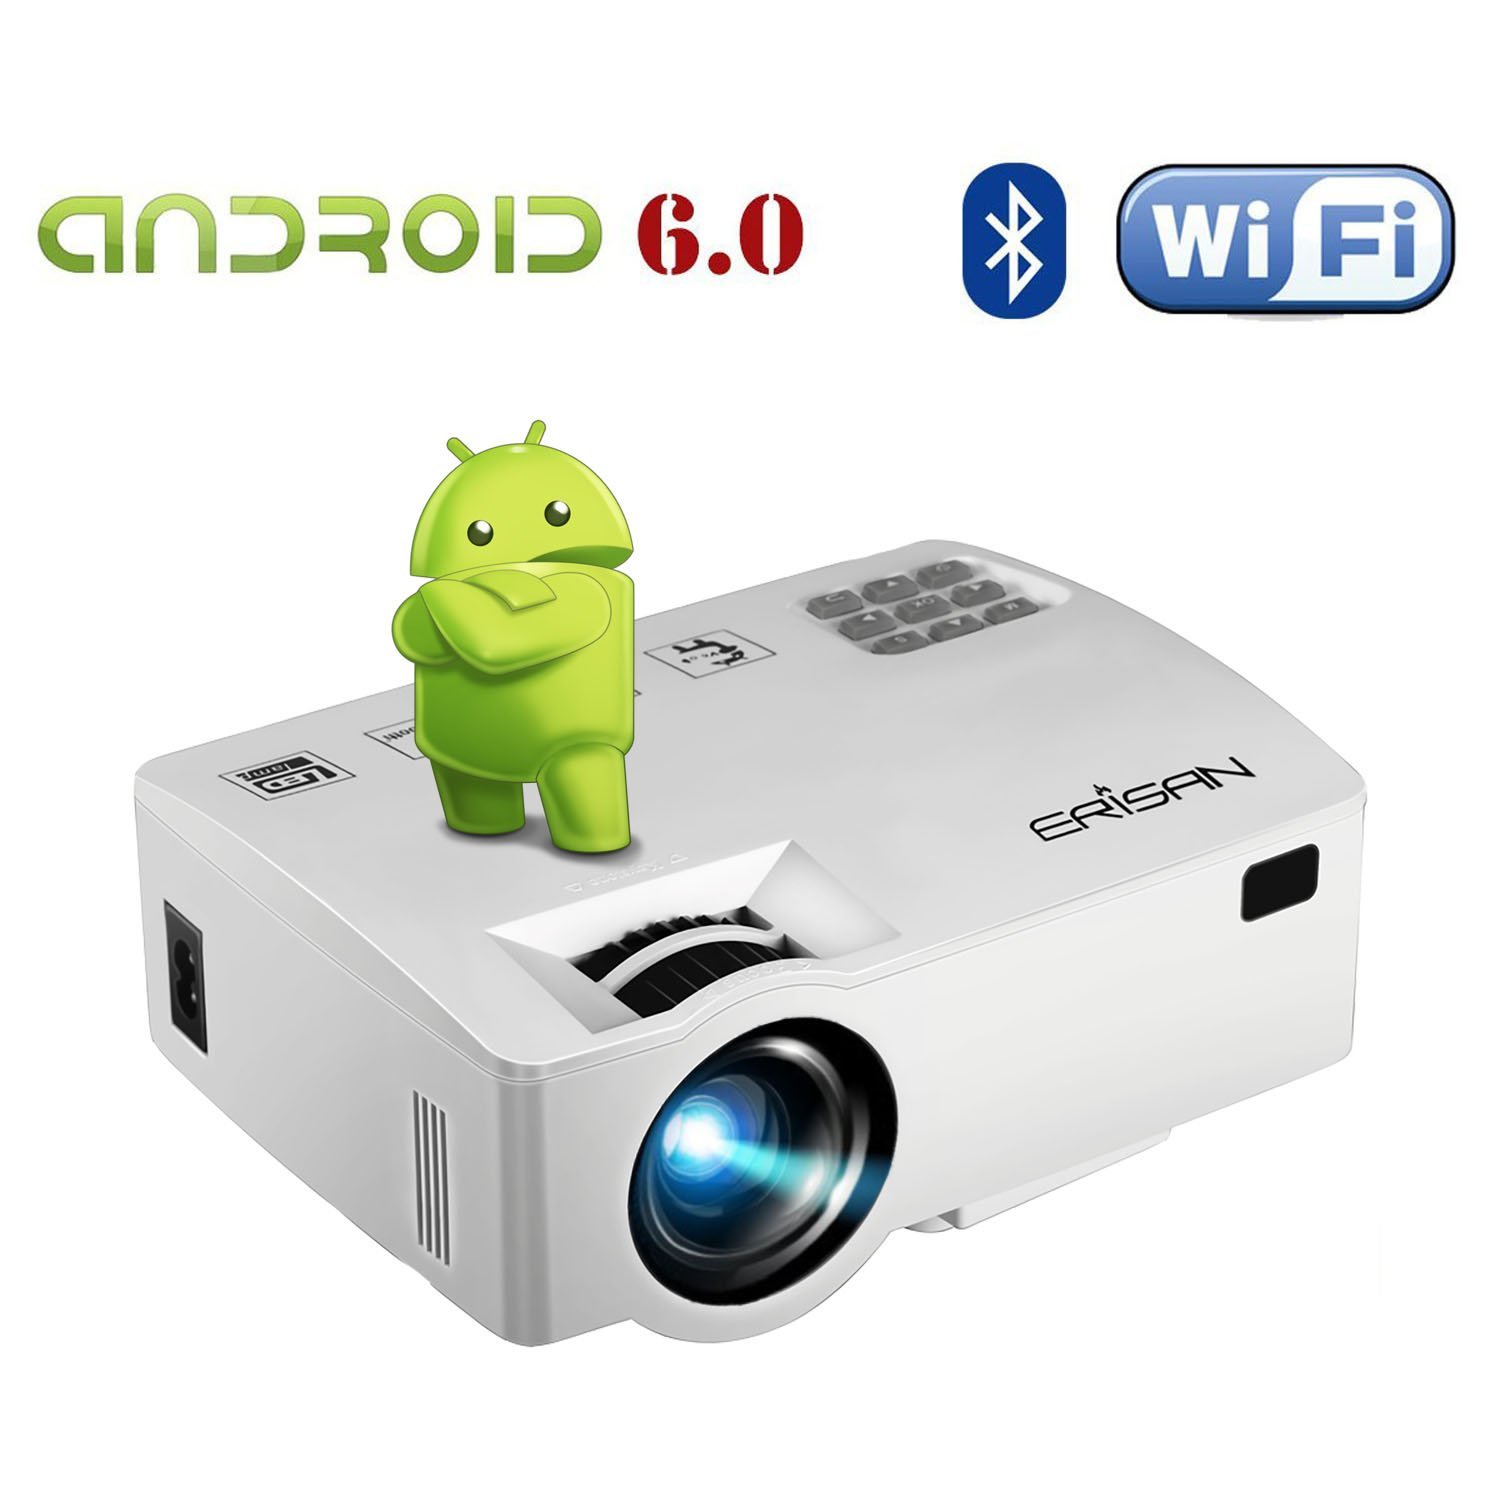 ERISAN Android 6.0 projector